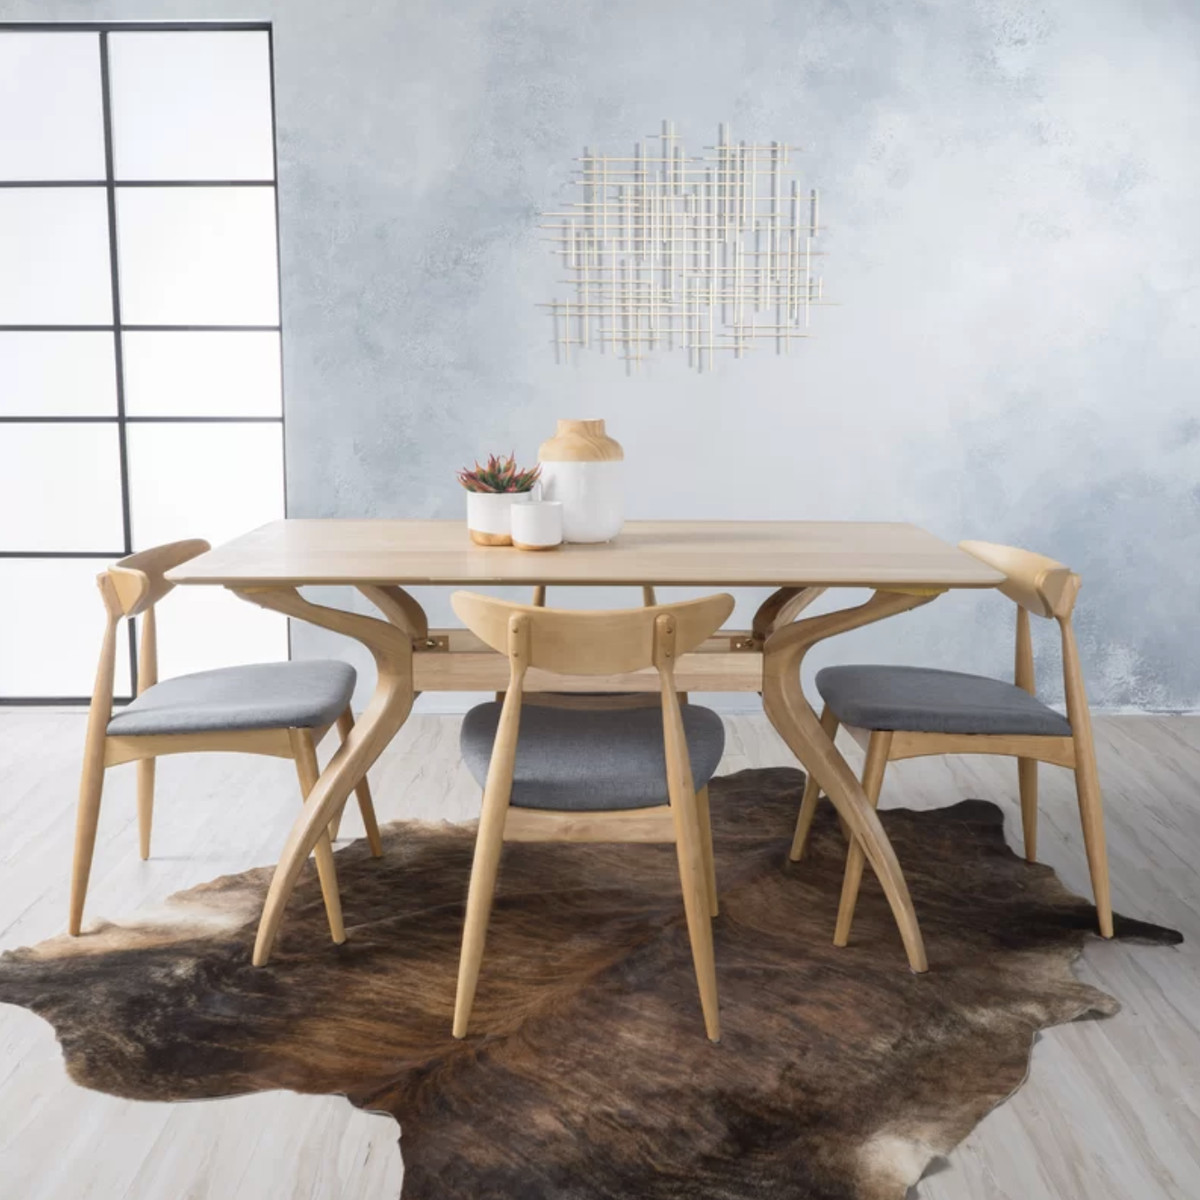 A wooden dining table with four matching chairs. 